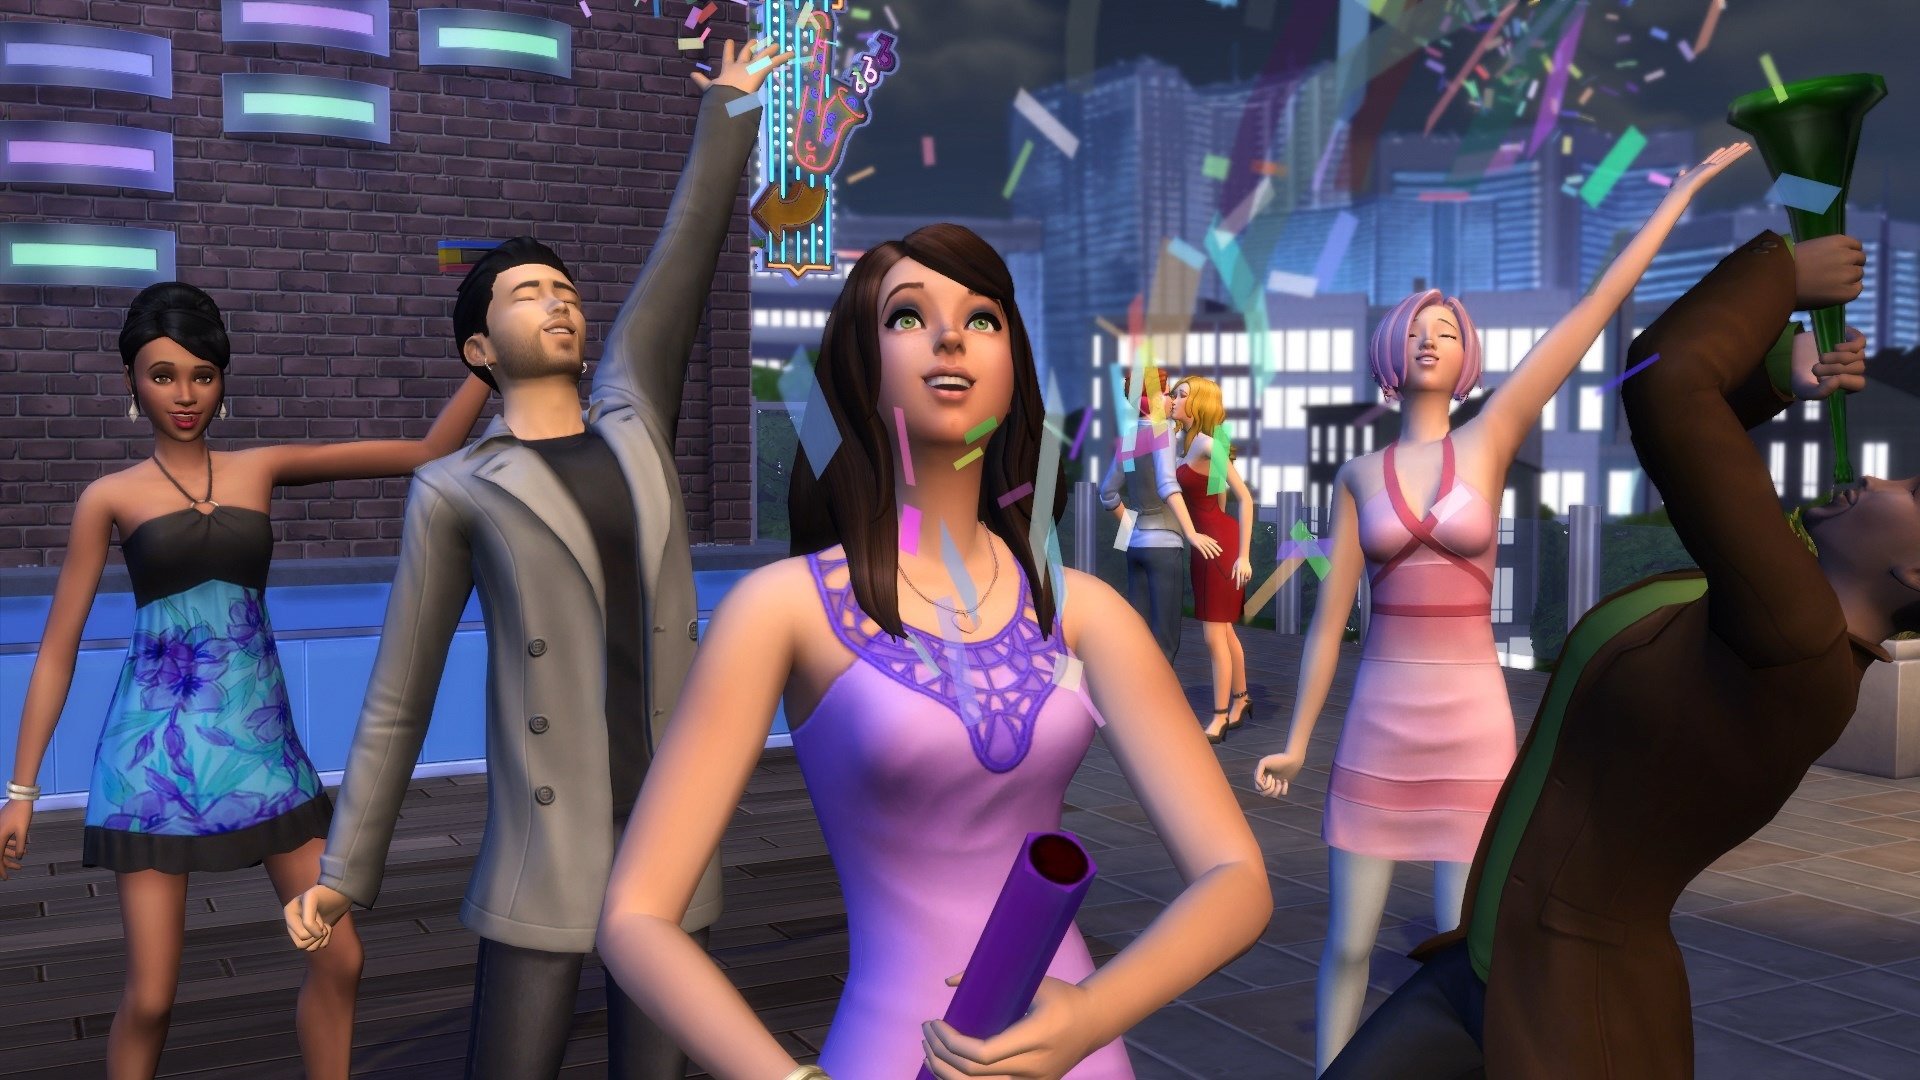 The Sims 4 is going free to play in October, EA announces - Polygon